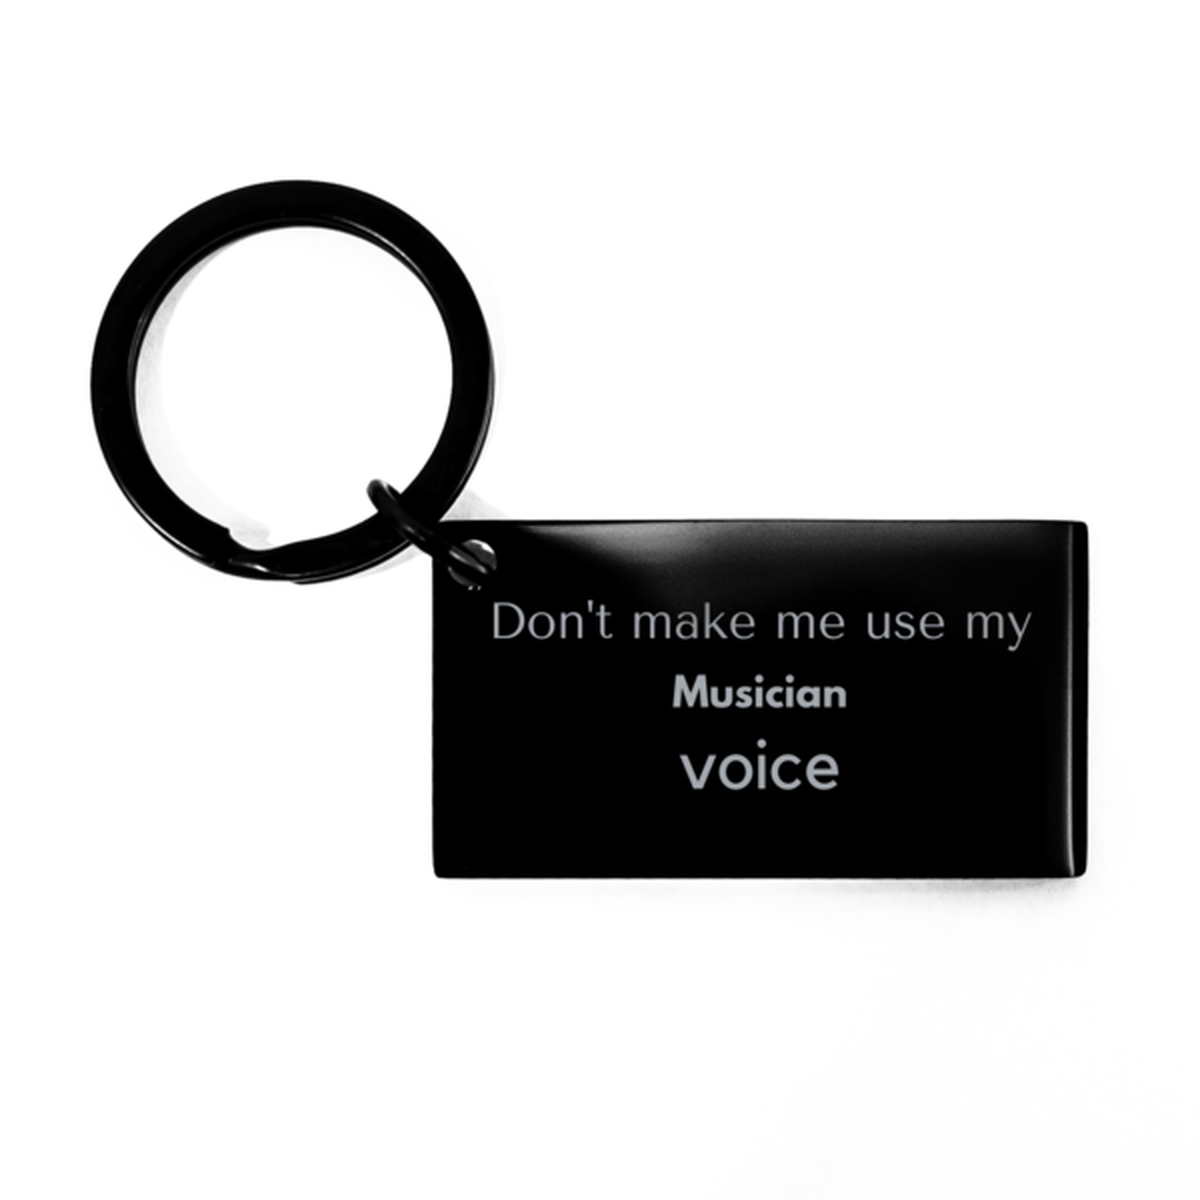 Don't make me use my Musician voice, Sarcasm Musician Gifts, Christmas Musician Keychain Birthday Unique Gifts For Musician Coworkers, Men, Women, Colleague, Friends